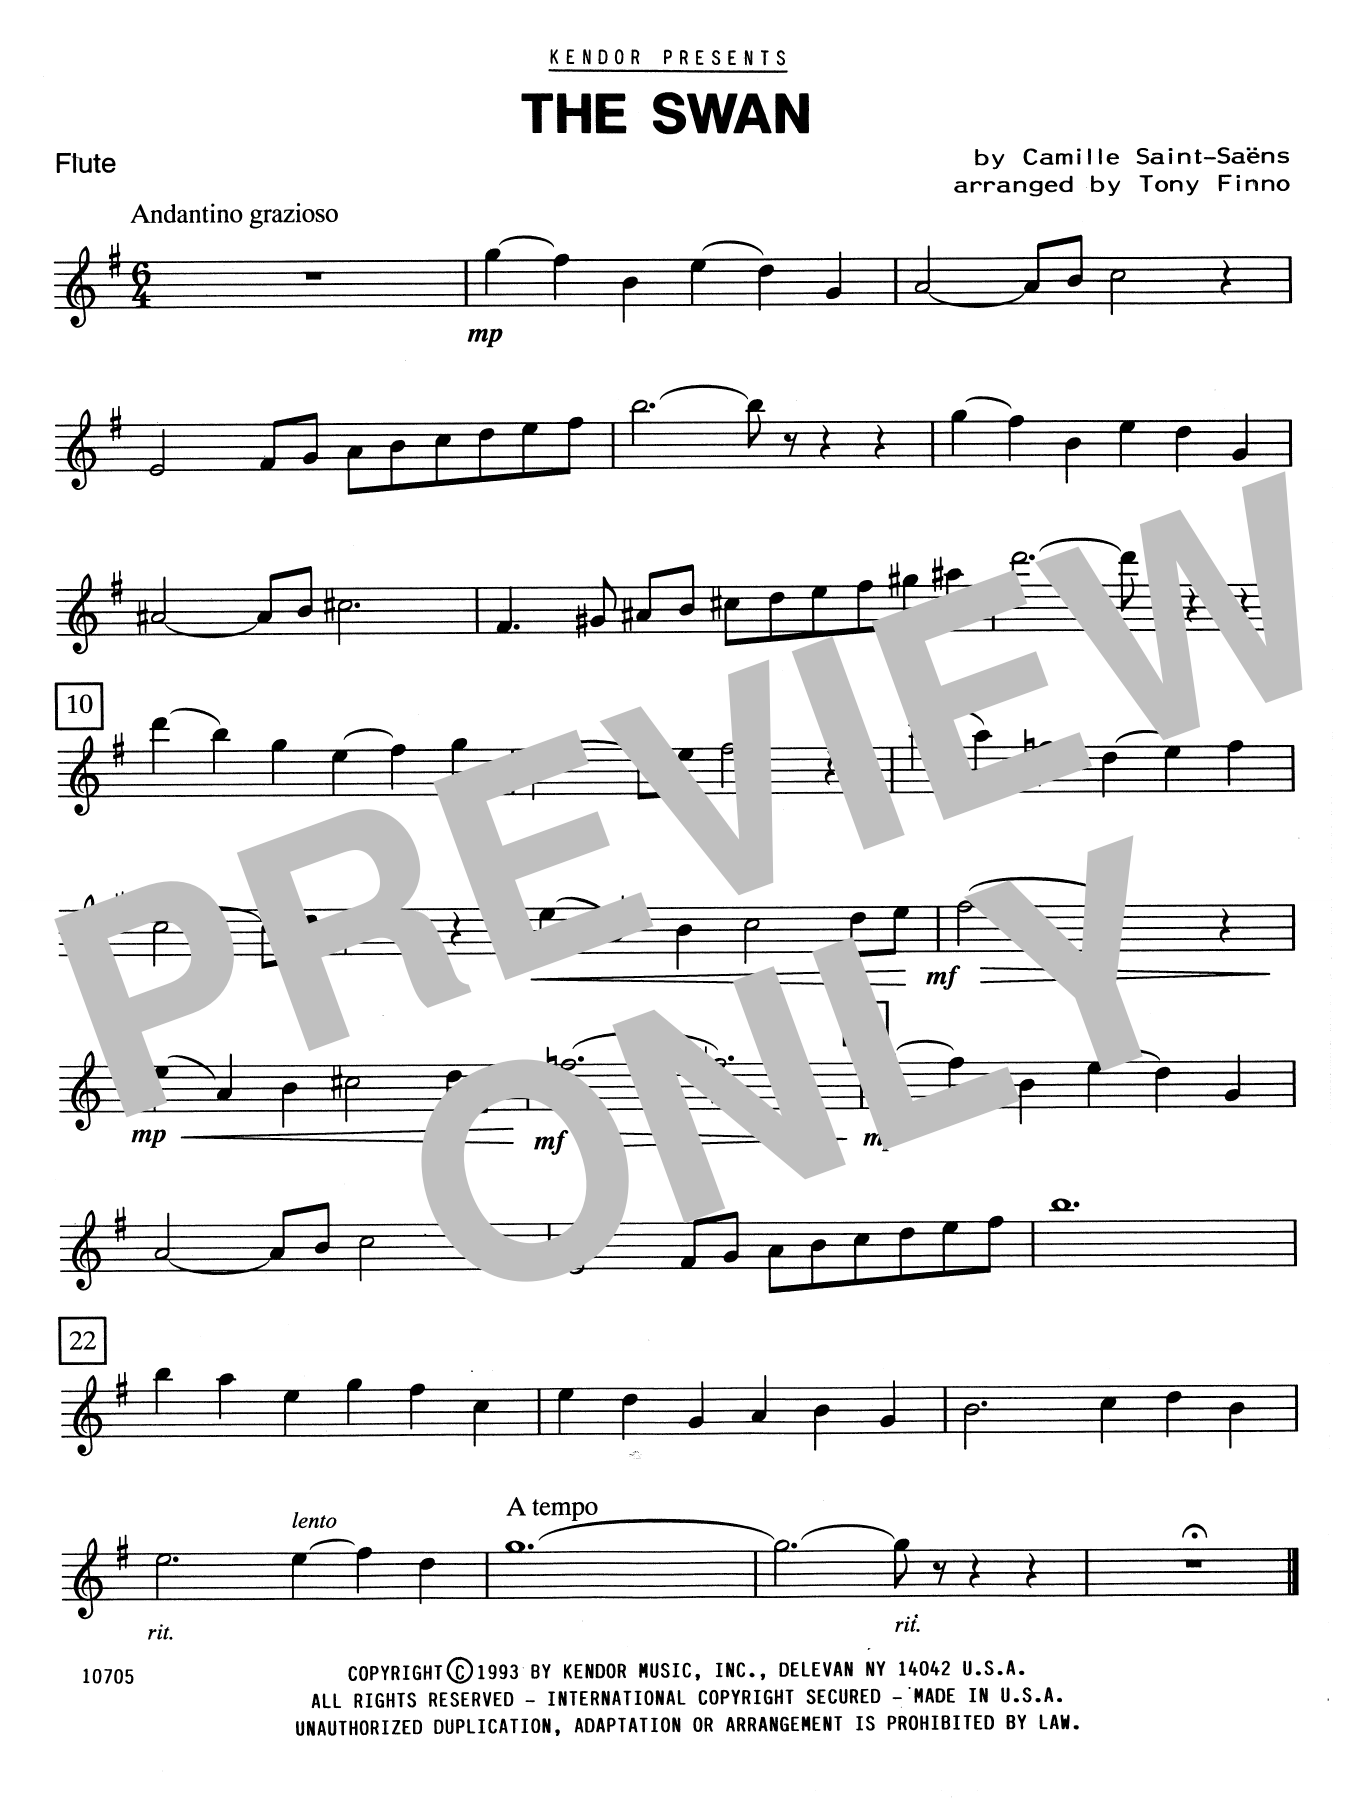 Download Tony Finno The Swan - Flute Sheet Music